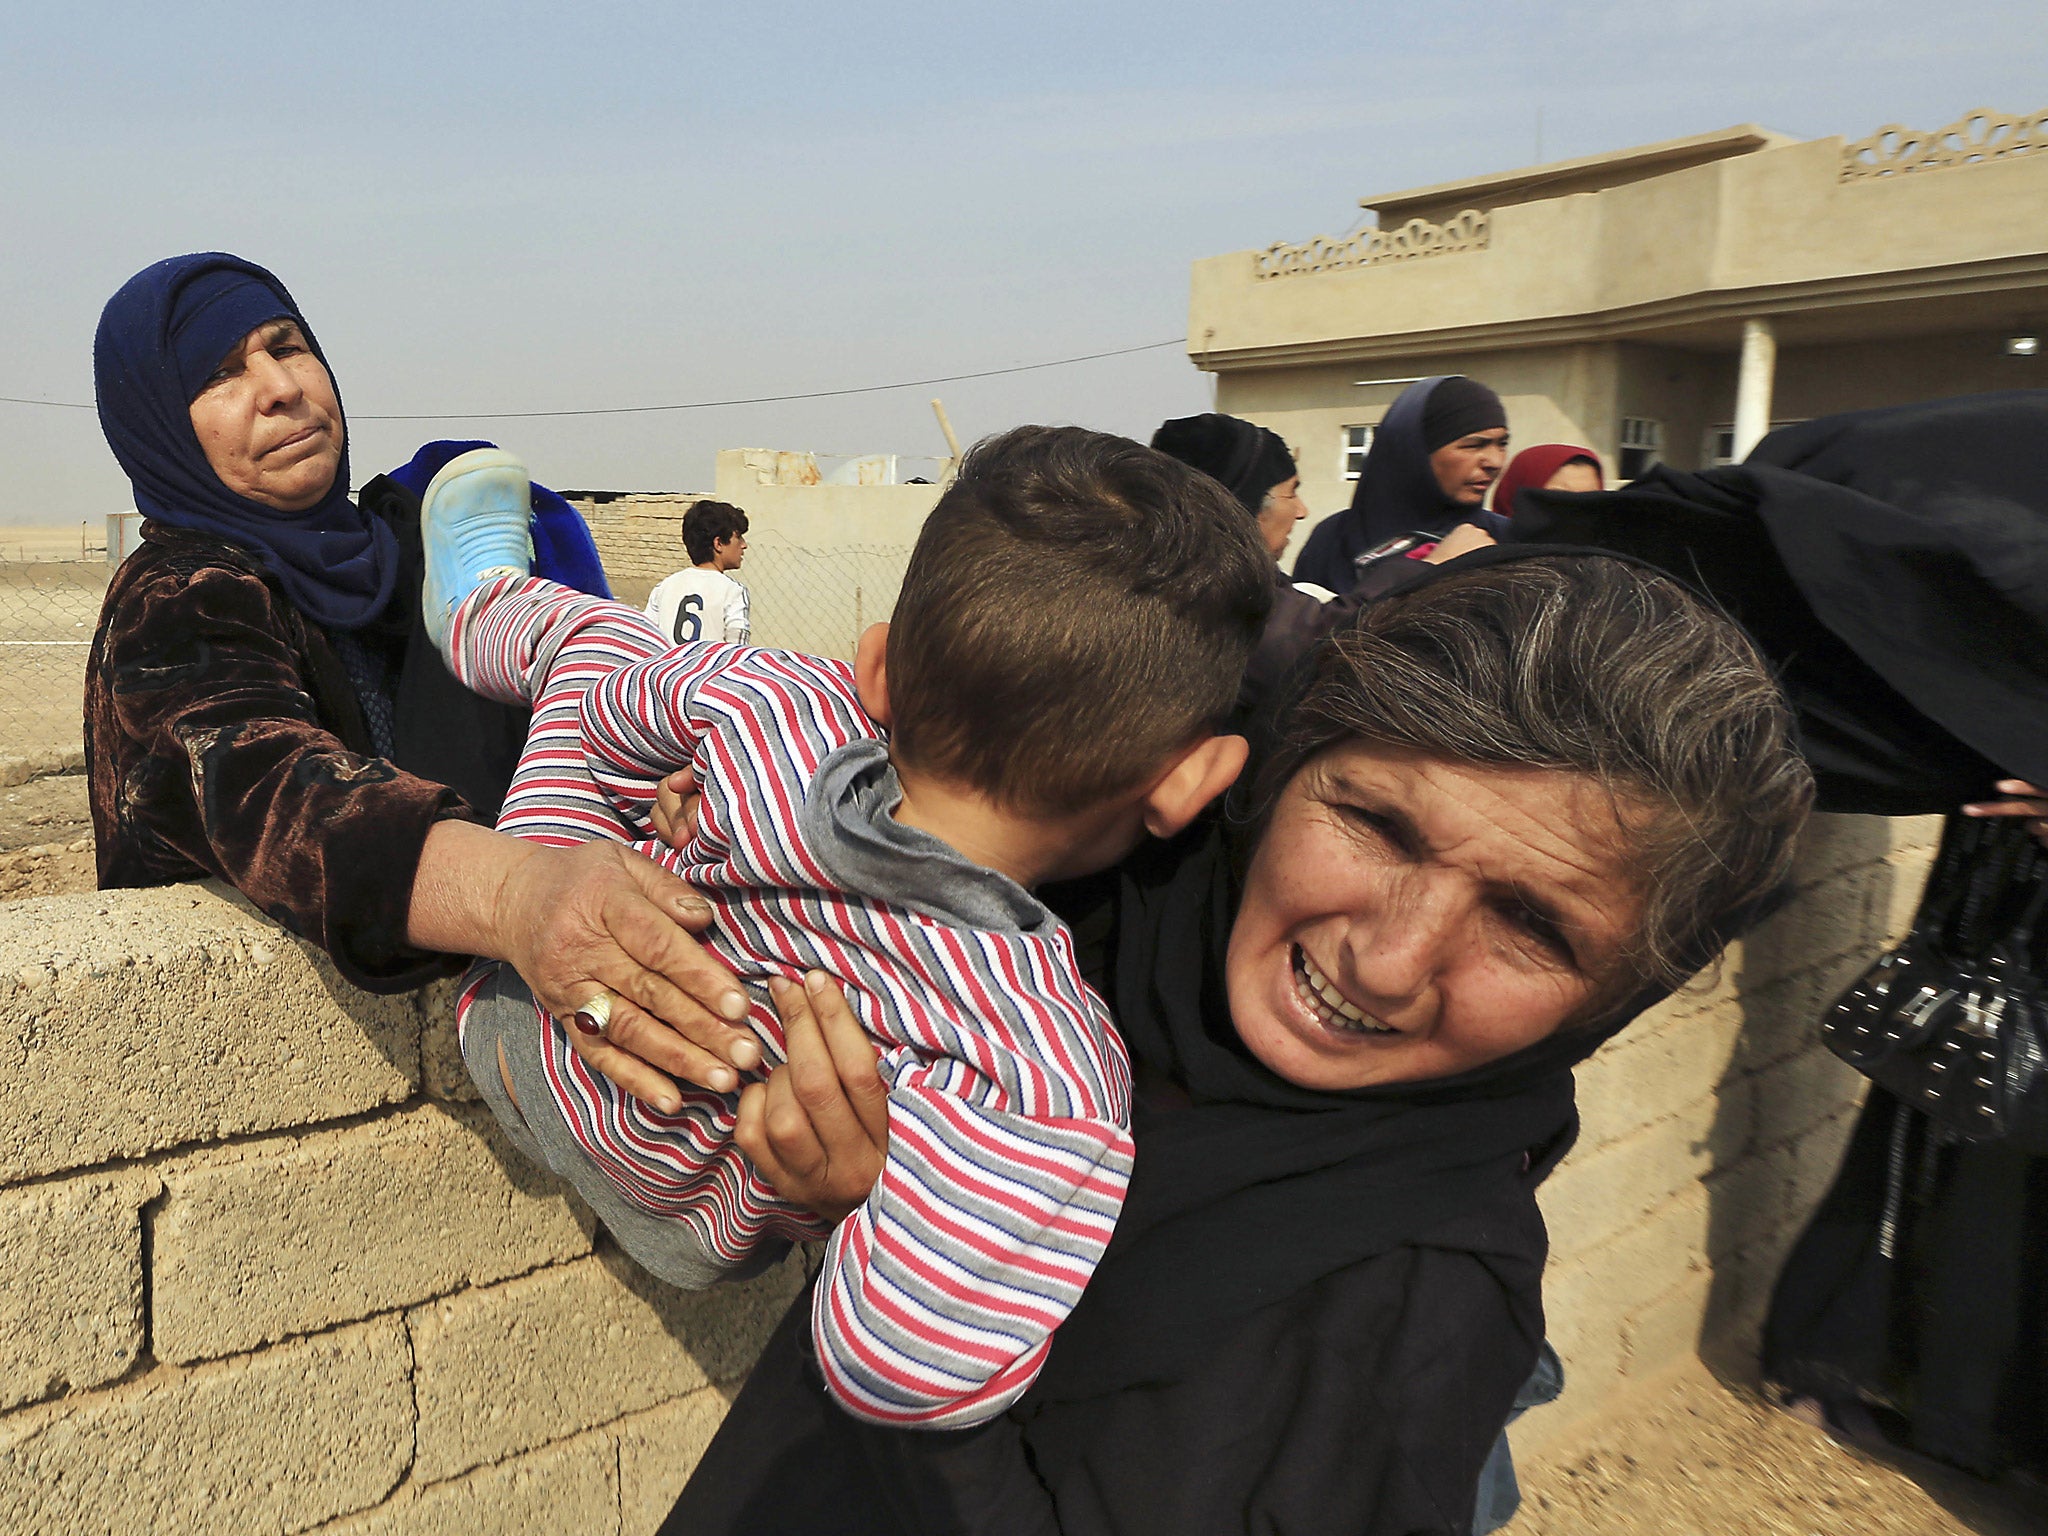 59,000 people have been displaced from their homes in the last month as the Iraqi army battles to free the city of Mosul from Isis, the International Organisation for Migration says